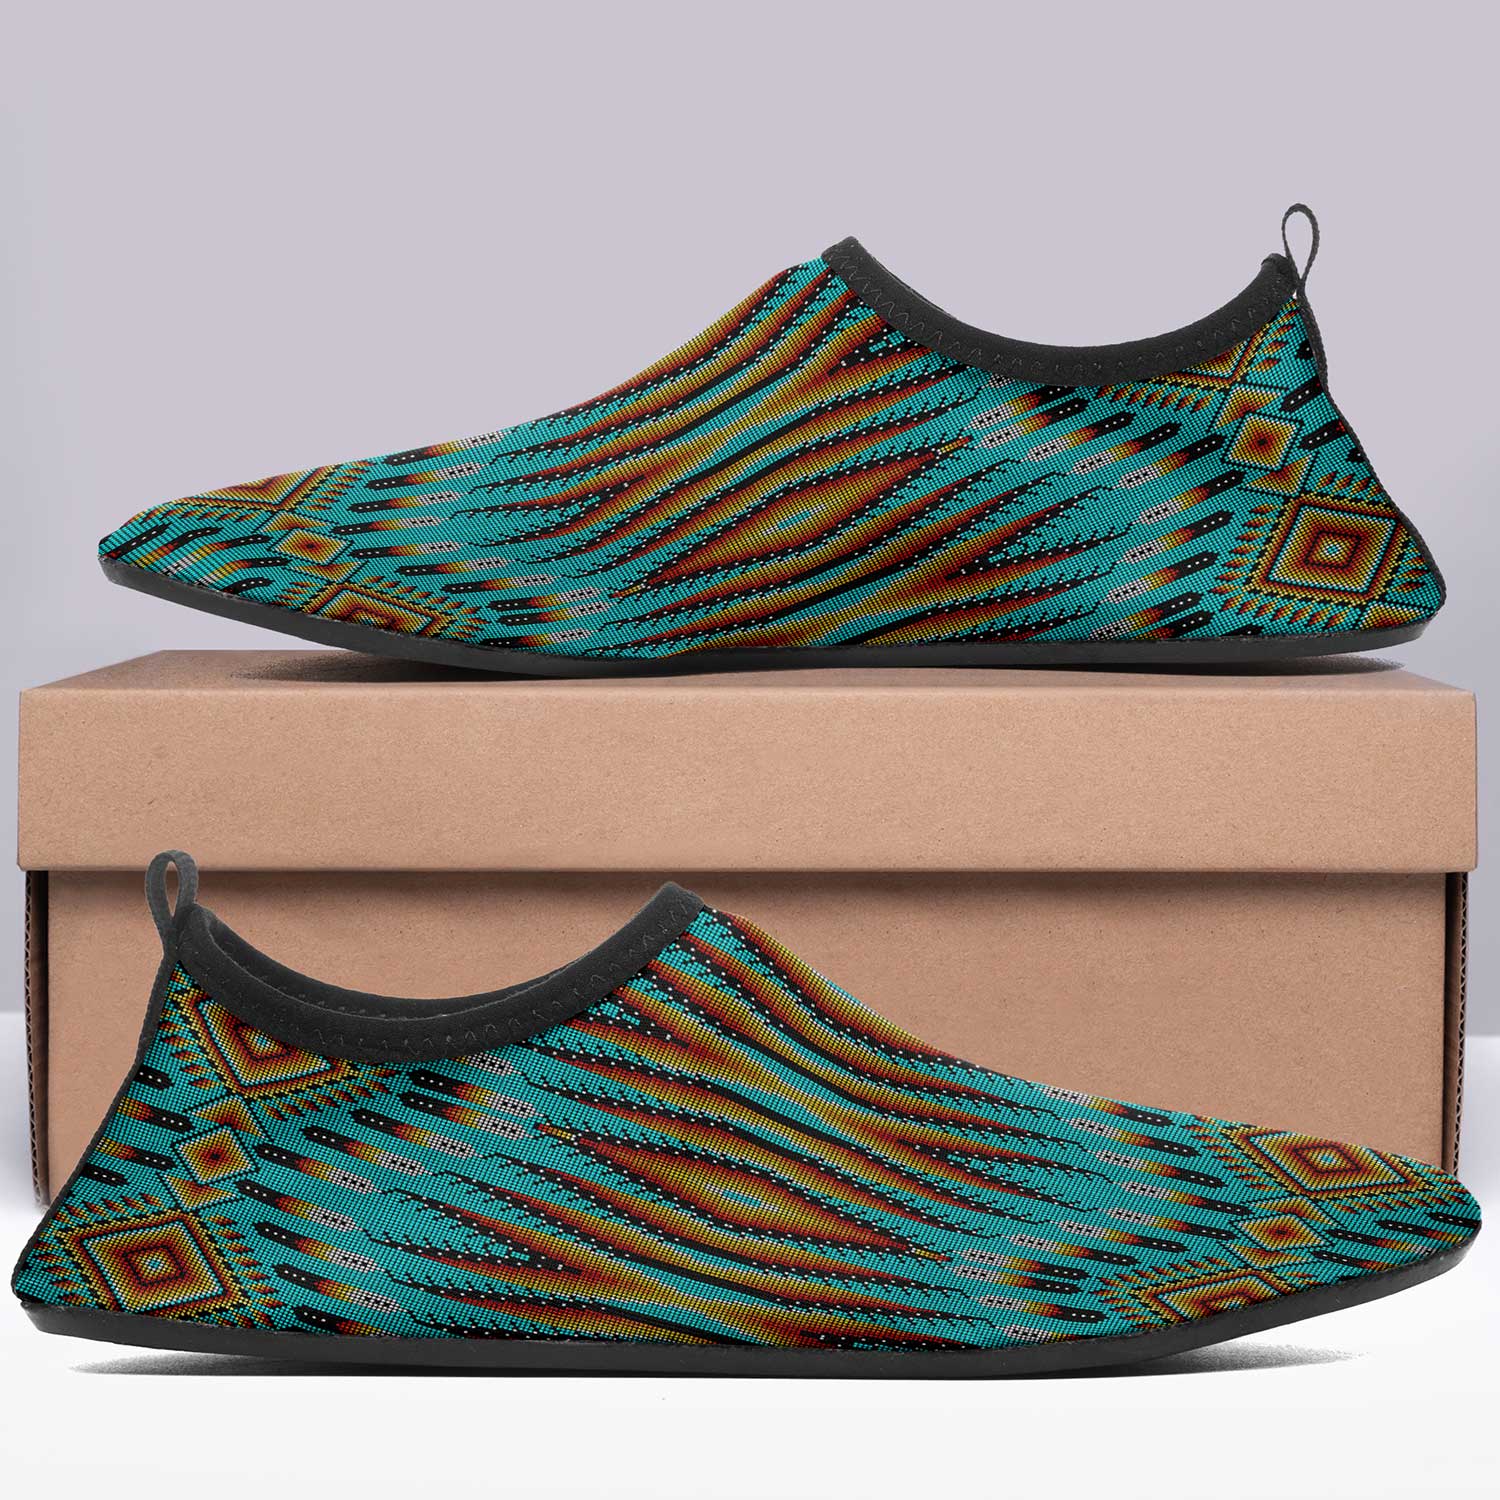 Fire Feather Turquoise Kid's Sockamoccs Slip On Shoes